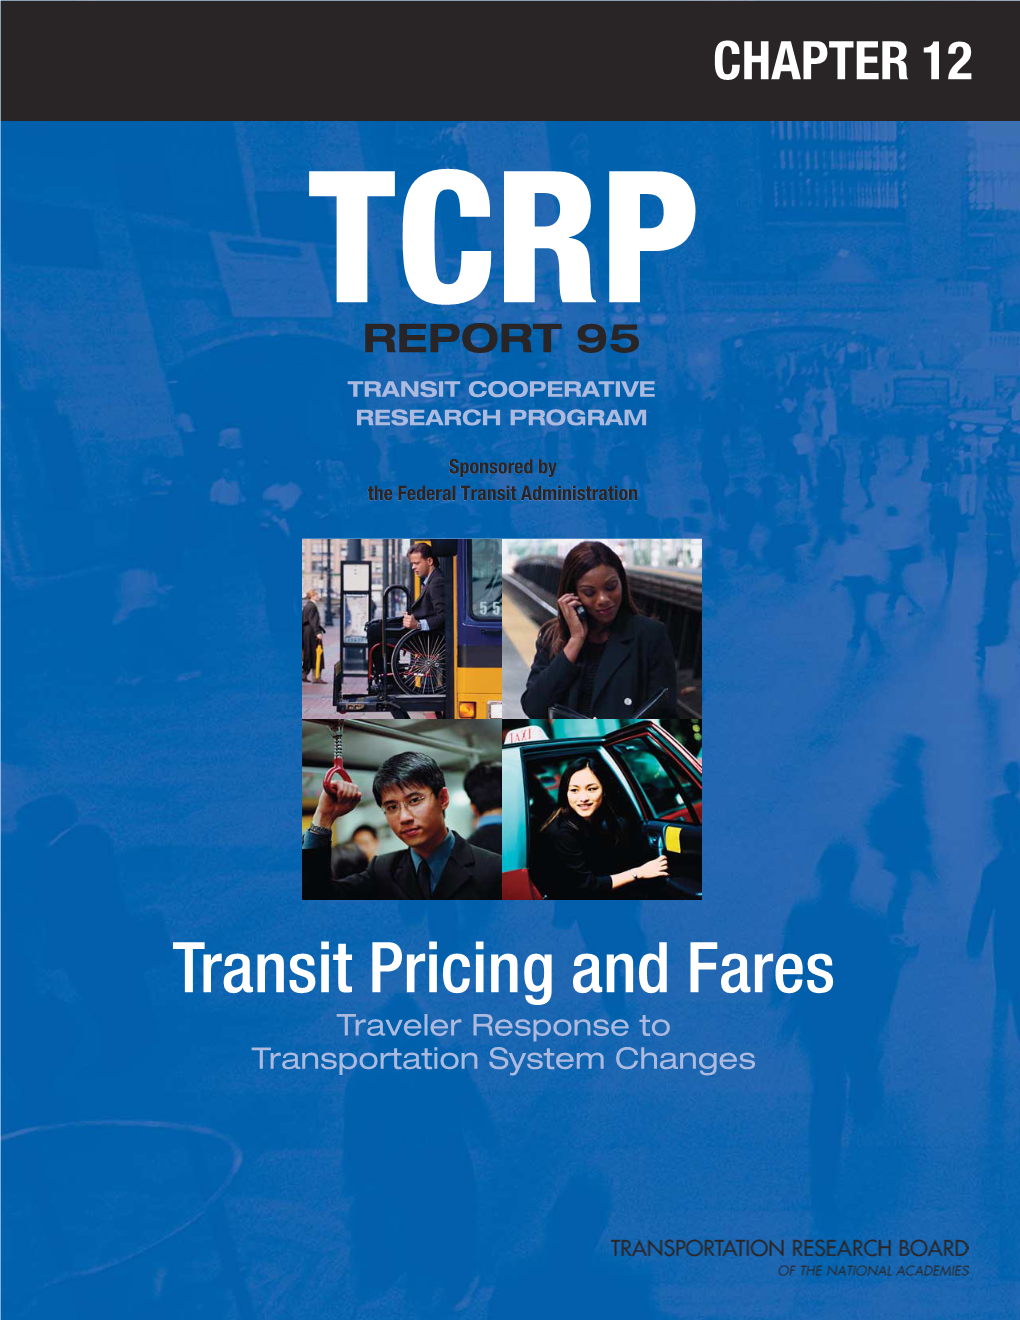 TCRP Report 95: Chapter 12 – Transit Pricing and Fares